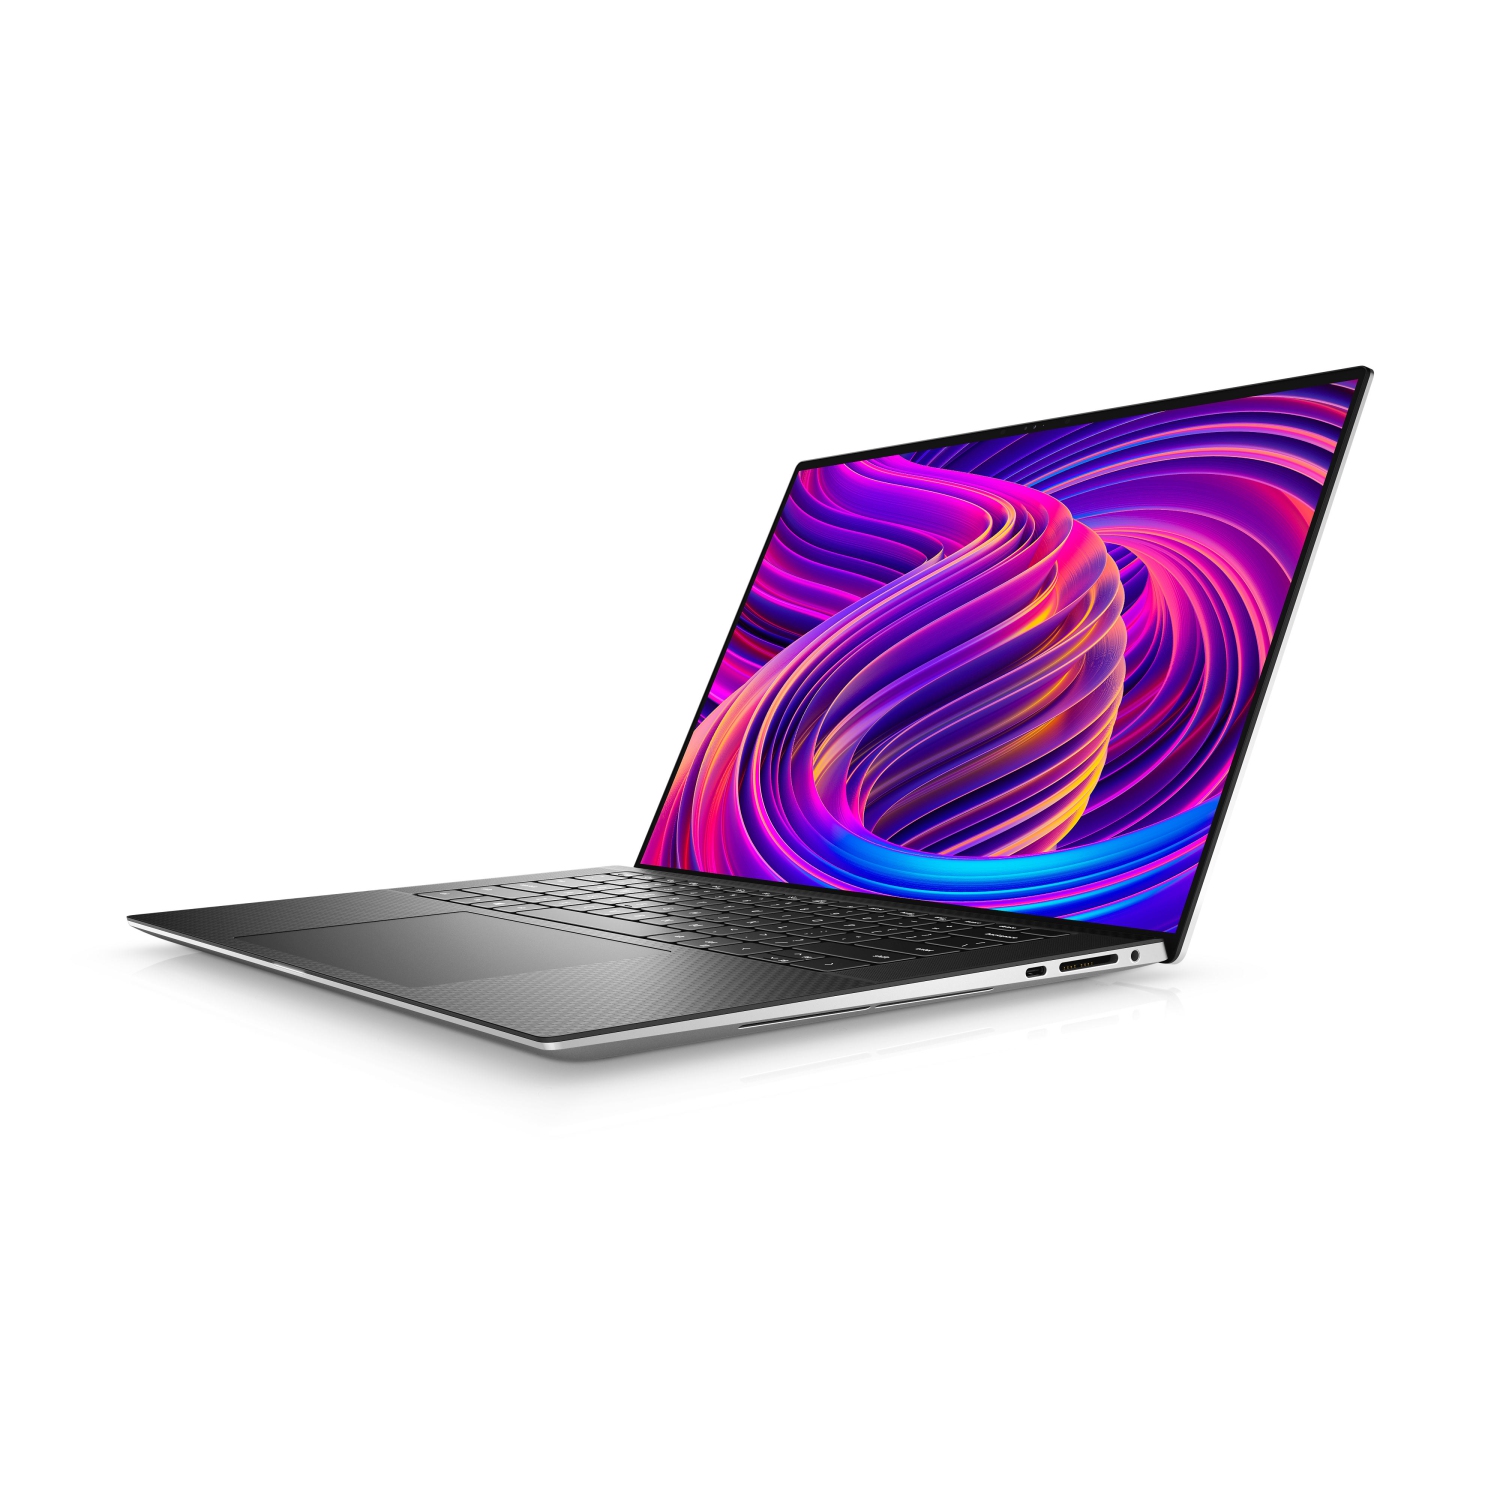 Refurbished (Excellent) - Dell XPS 15 9510 Laptop (2021), 15.6" 4K Touch, Core i7 - 1TB SSD - 64GB RAM - 3050 Ti, 8 Cores @ 4.6 GHz - 11th Gen CPU Certified Refurbished